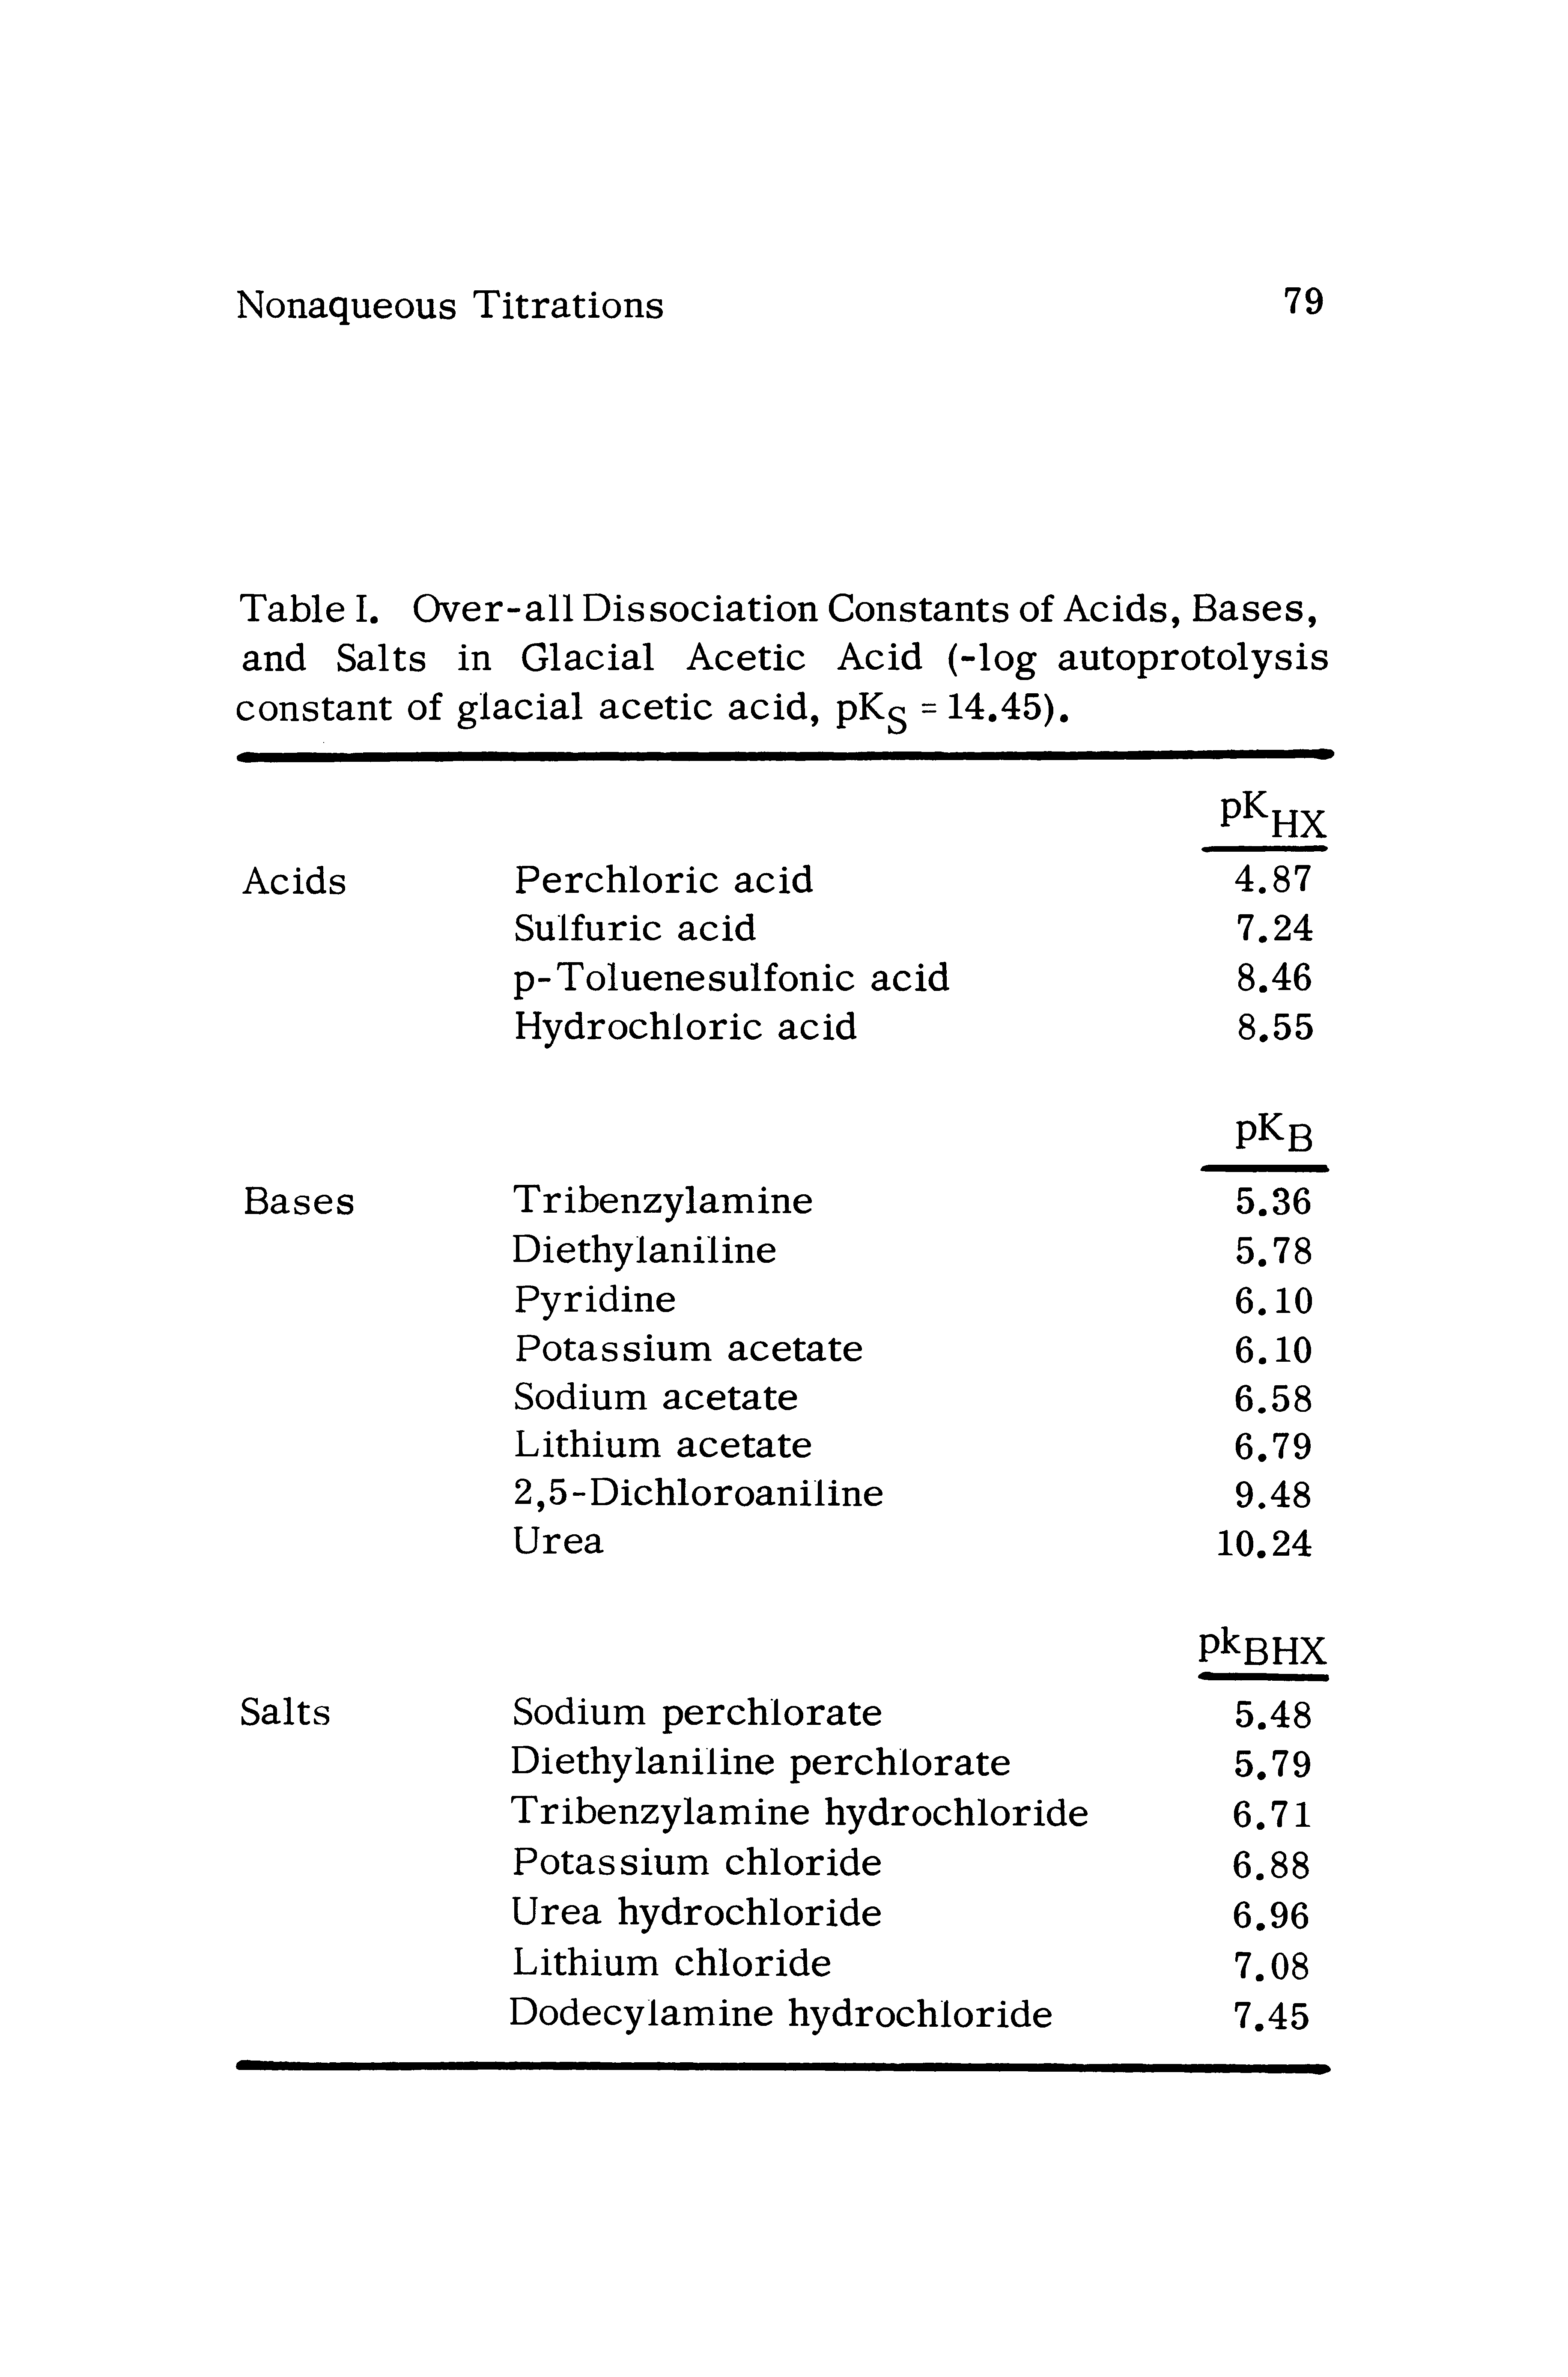 Table I. Over-all Dissociation Constants of Acids, Bases, and Salts in Glacial Acetic Acid (-log autoprotolysis constant of glacial acetic acid, pKg = 14.45). ...